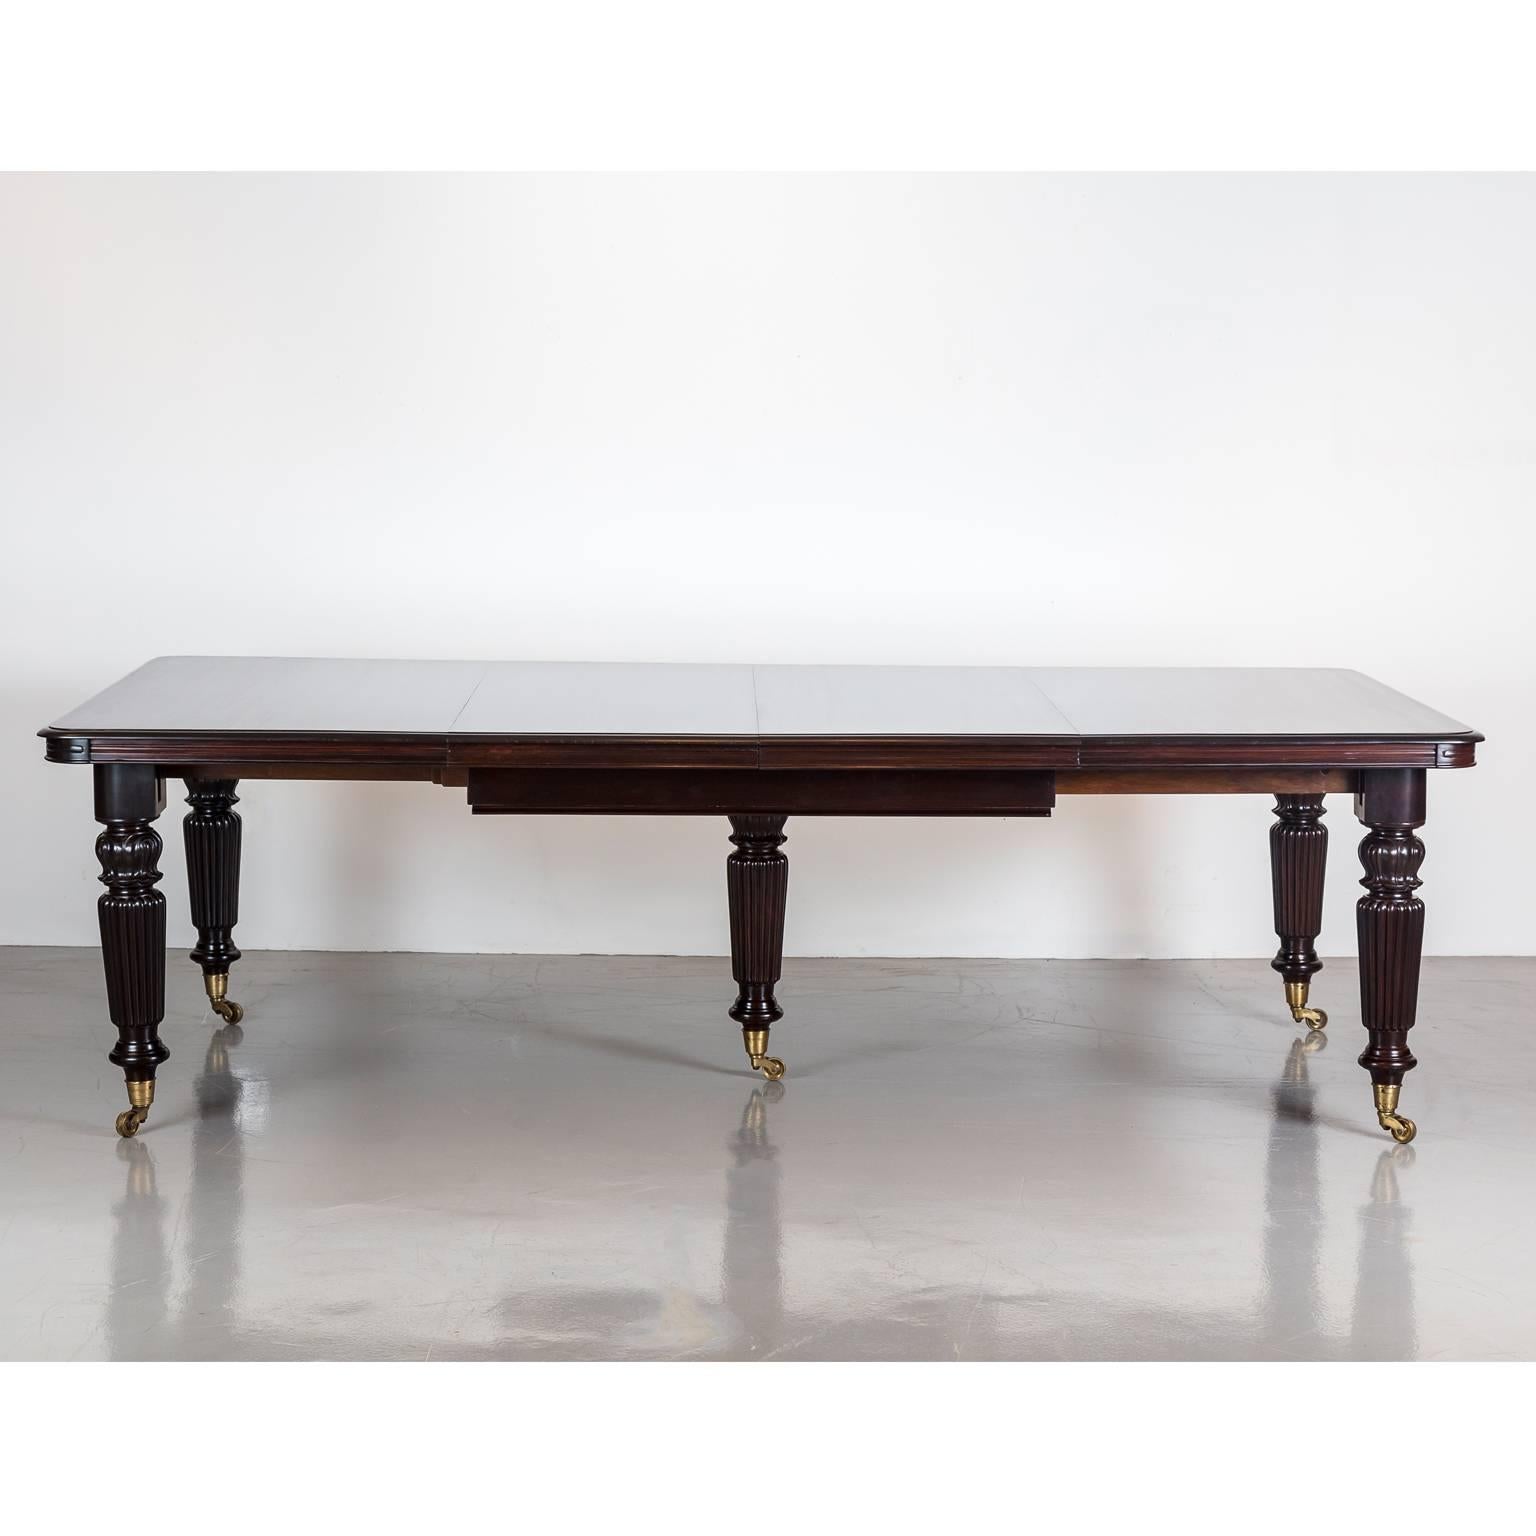 A stunning British Colonial rosewood extending dining table. The top with a deep moulded edge and rounded corners. The table has a telescopic under-frame that extends via a winding mechanism, which allows the table to be extended while the center